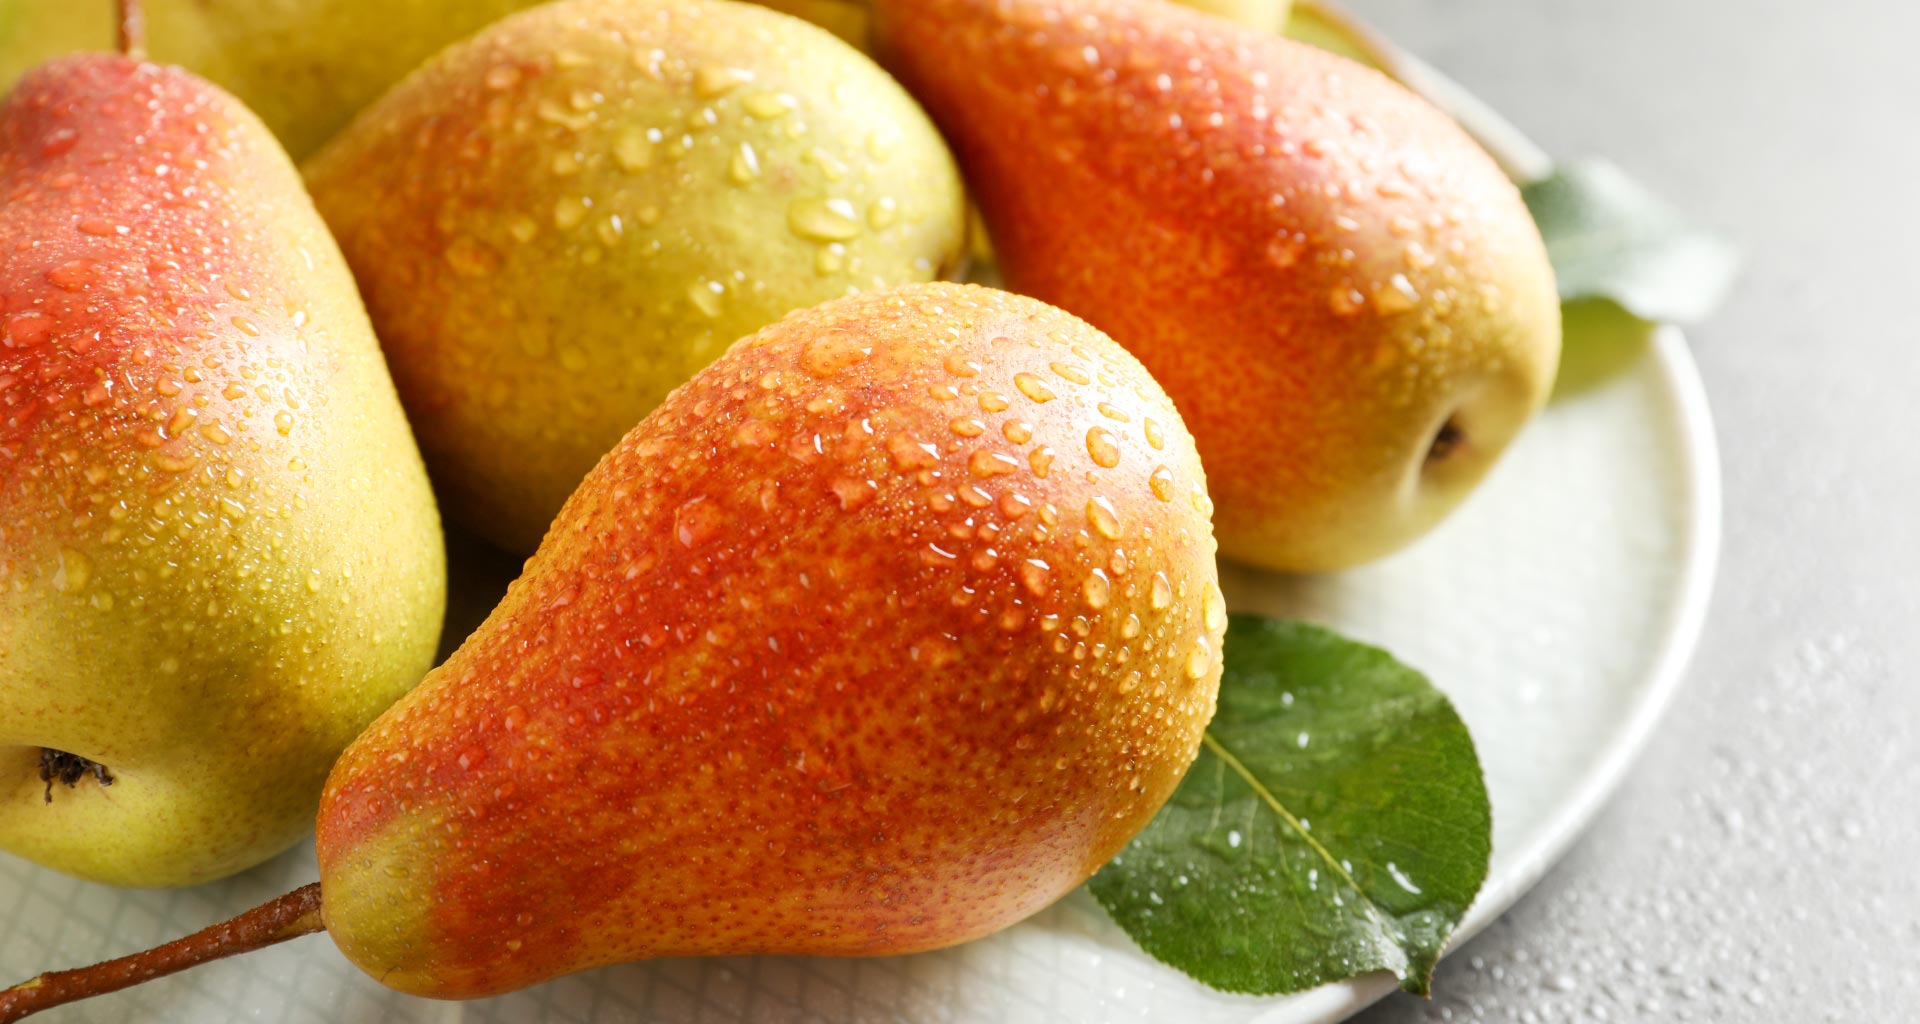 Coscia Pears, a fruit for all ages